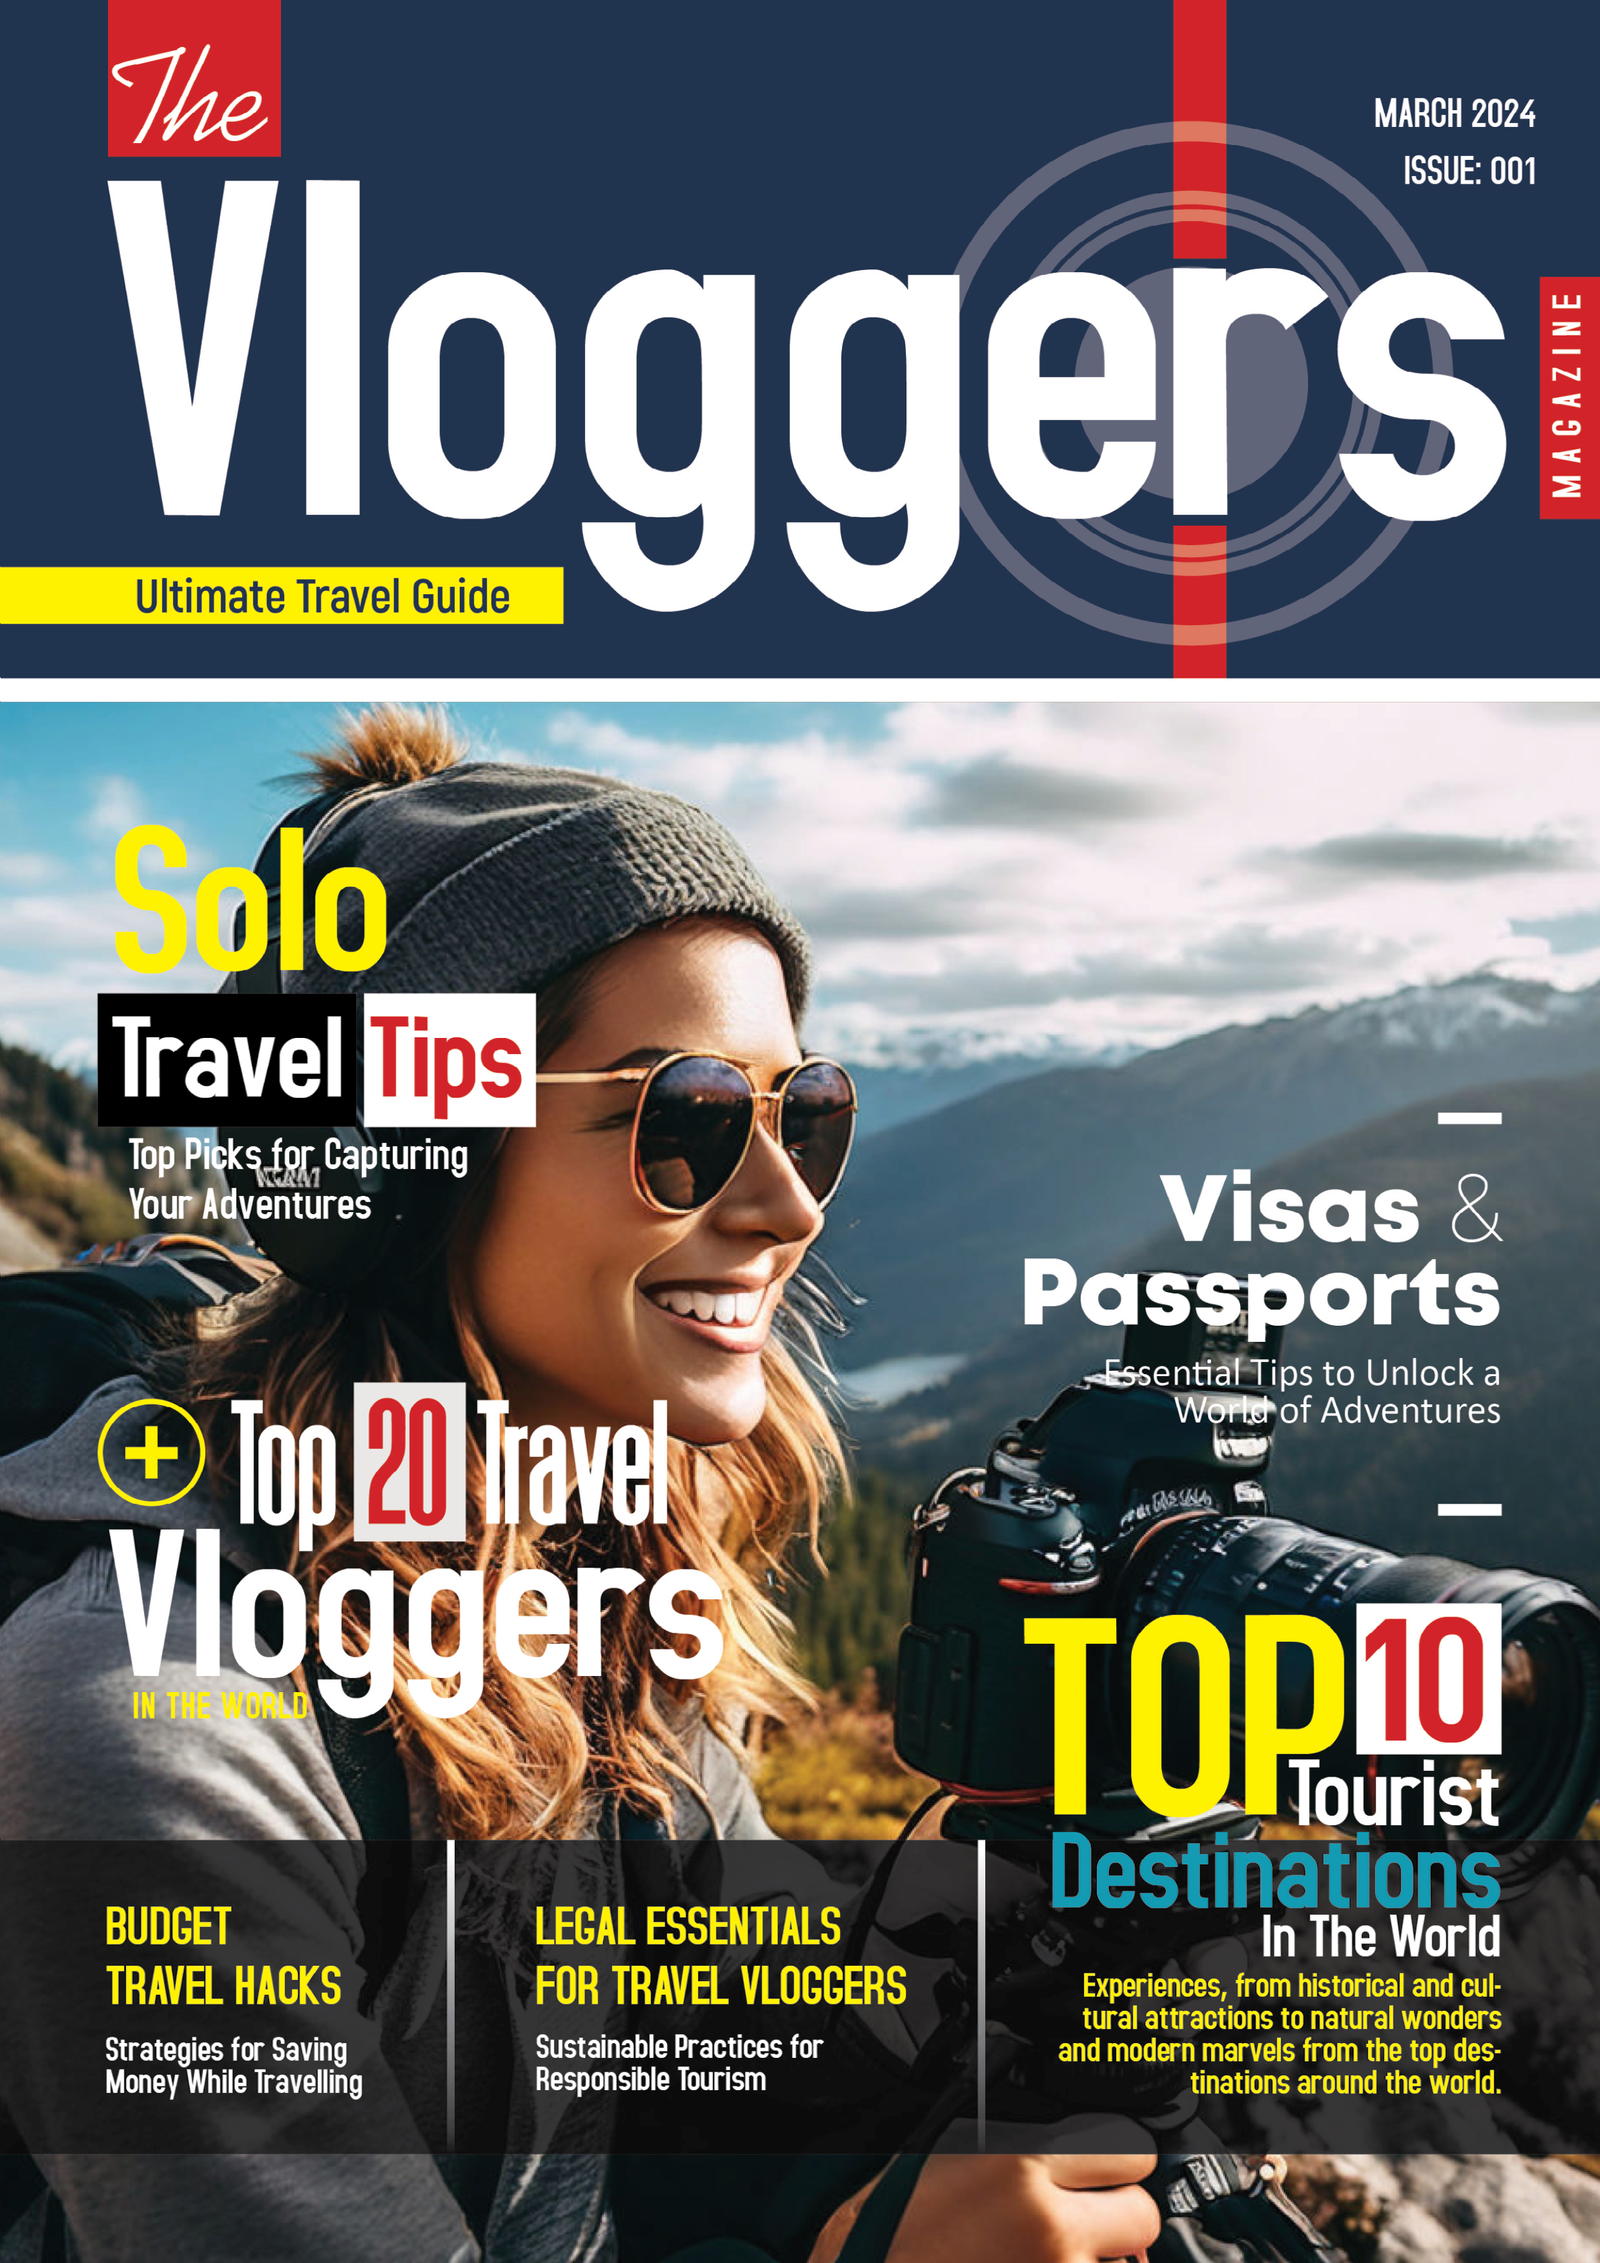 The Vloggers Guide Magazine